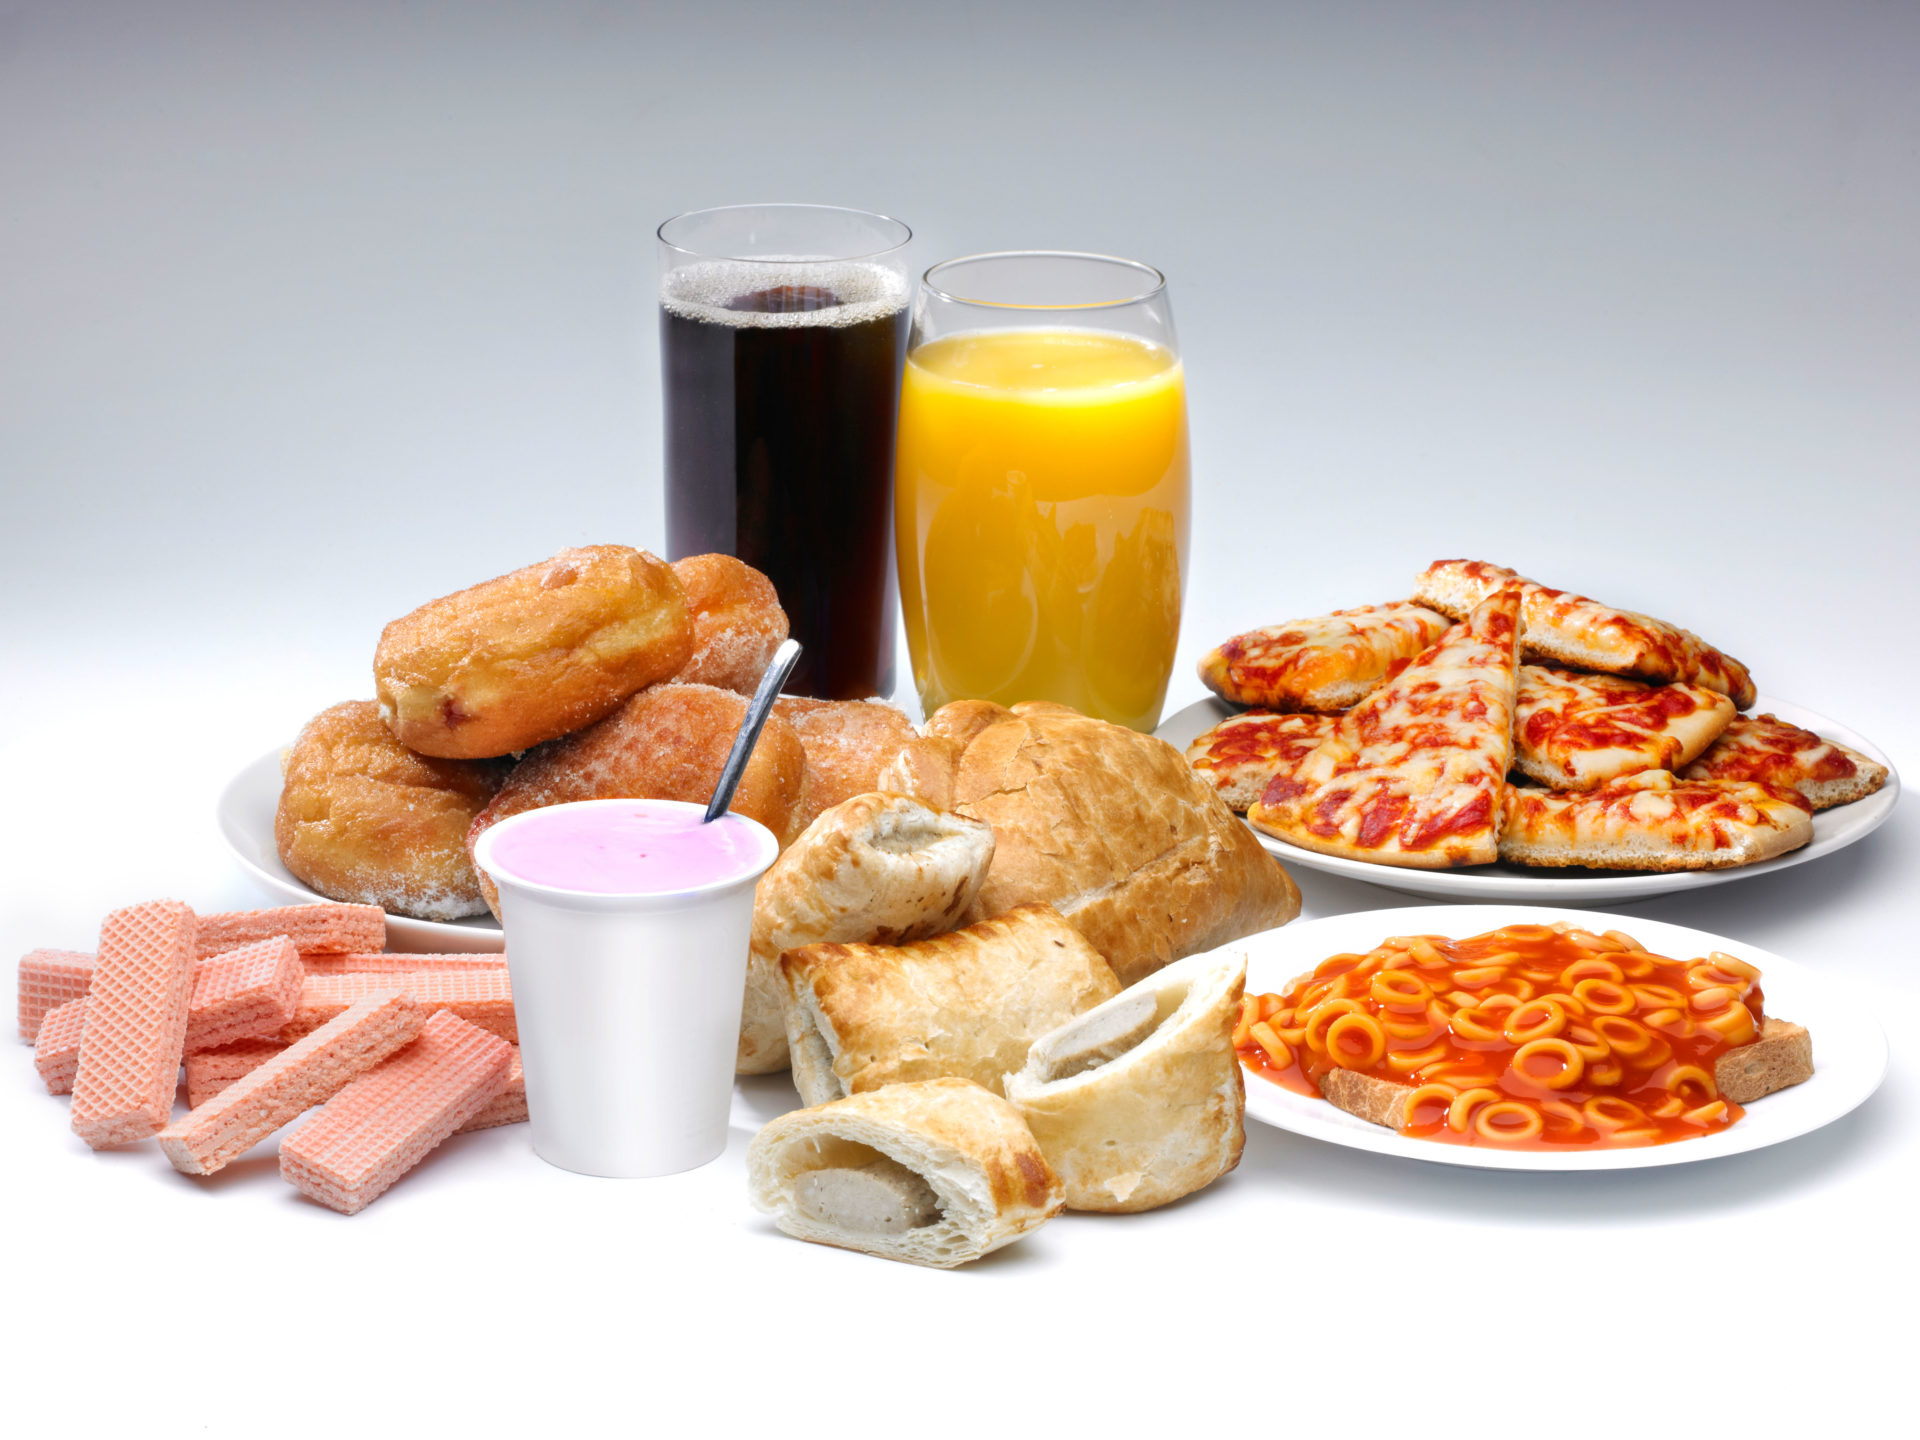 A selection of processed food and drink.